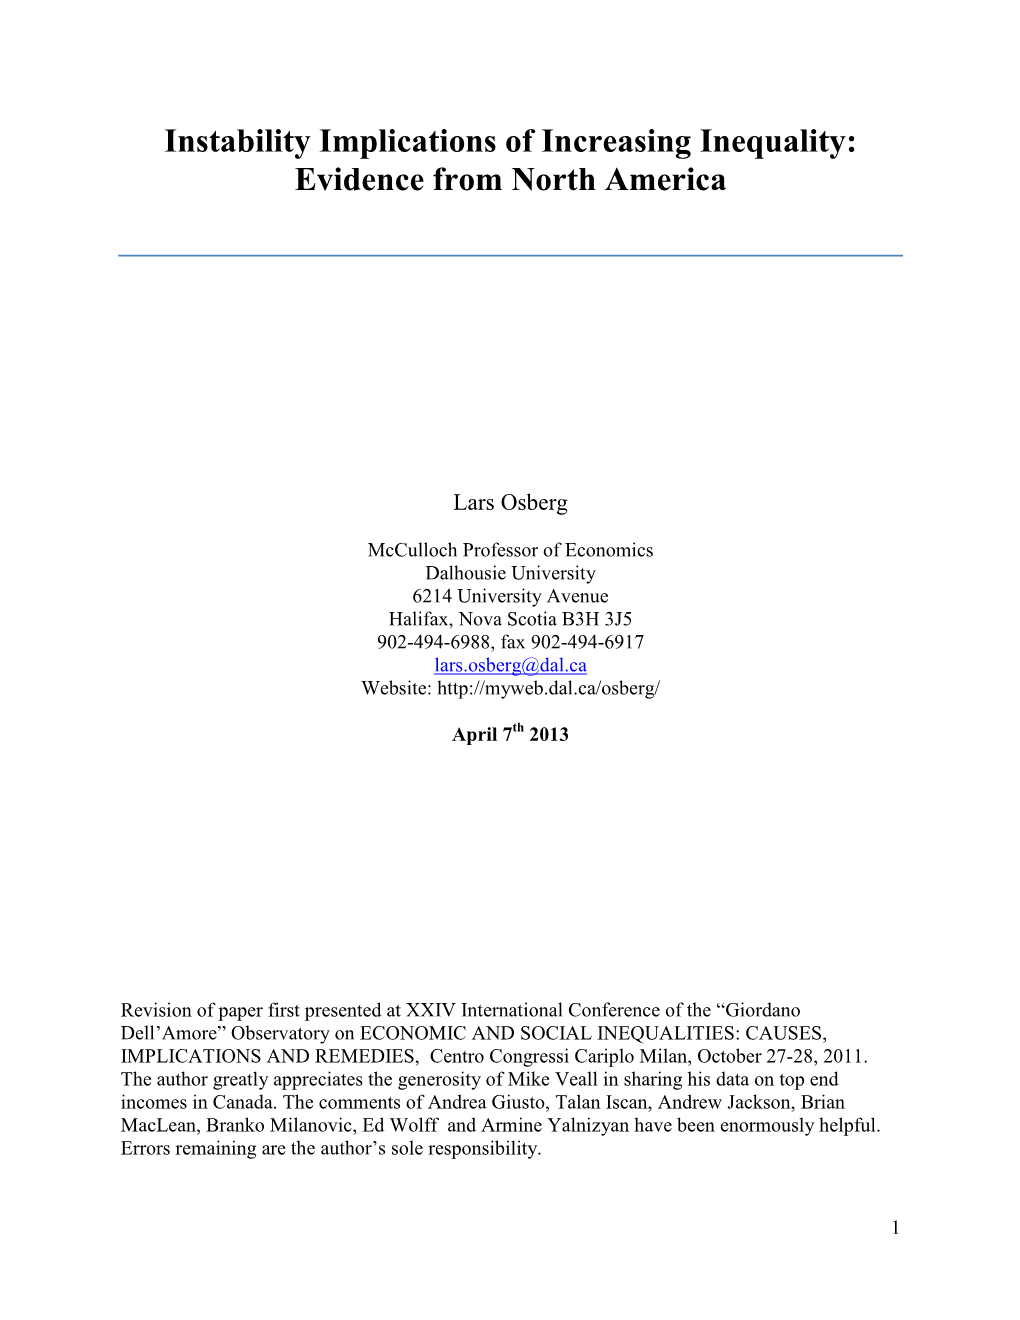 Instability Implications of Increasing Inequality: Evidence from North America